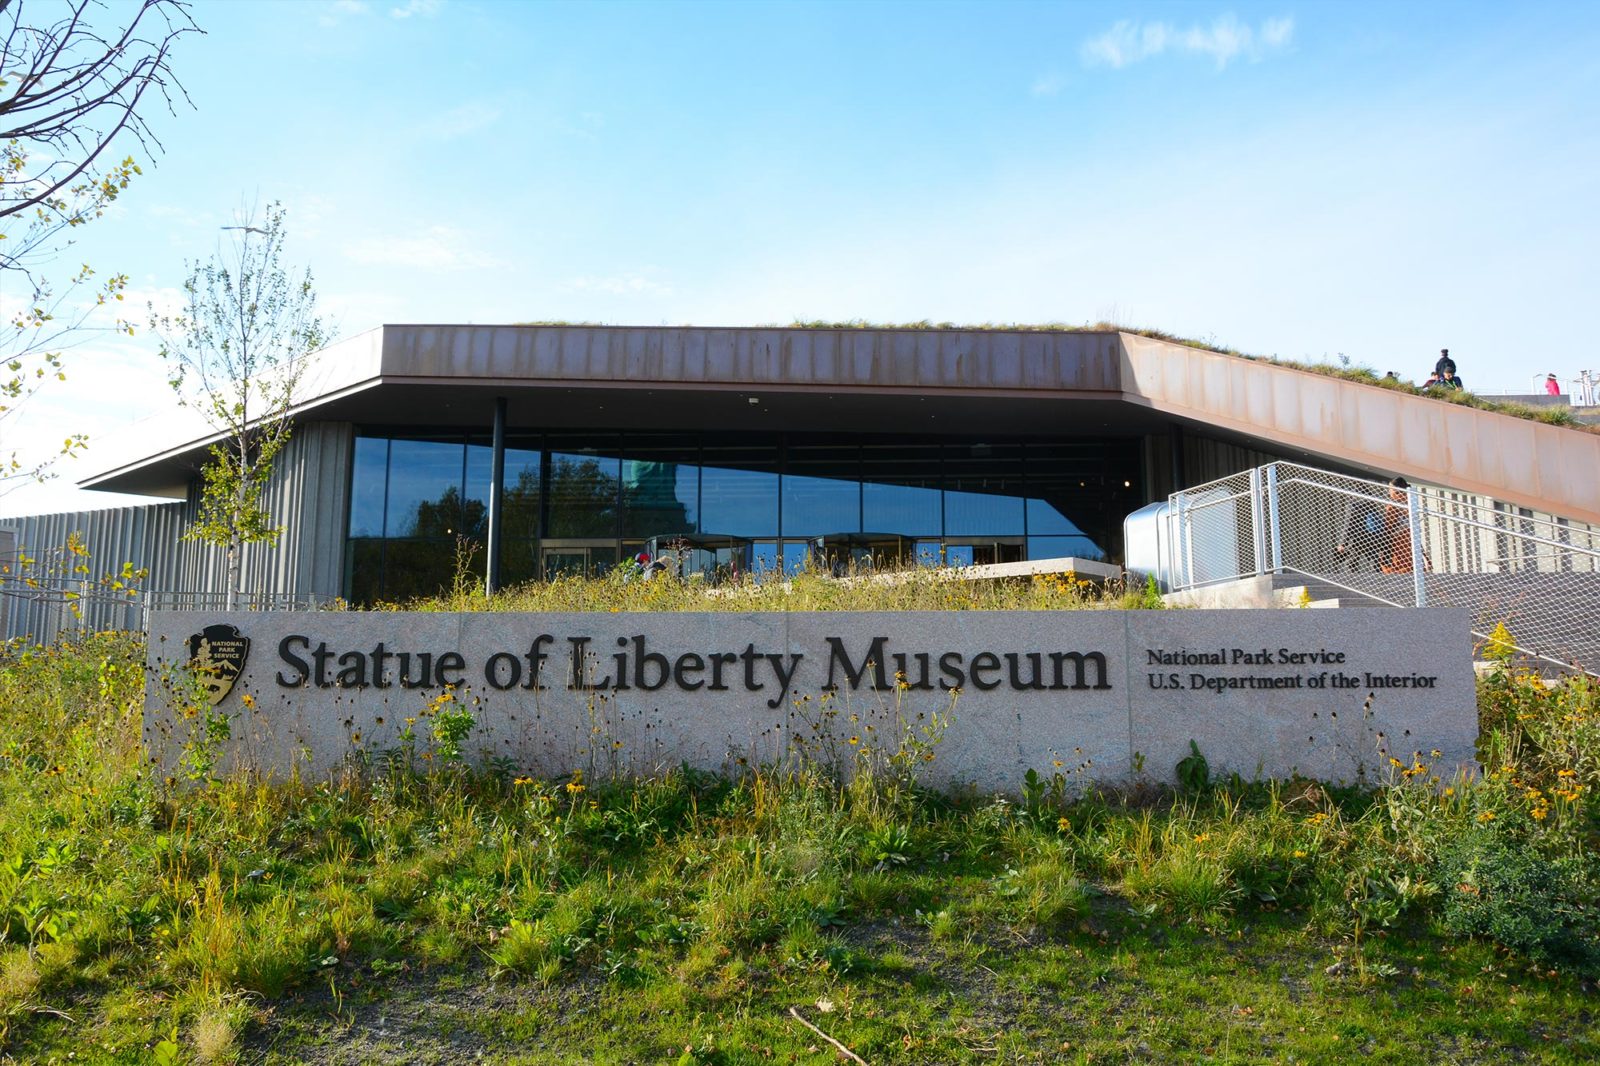 Statue of Liberty Museum